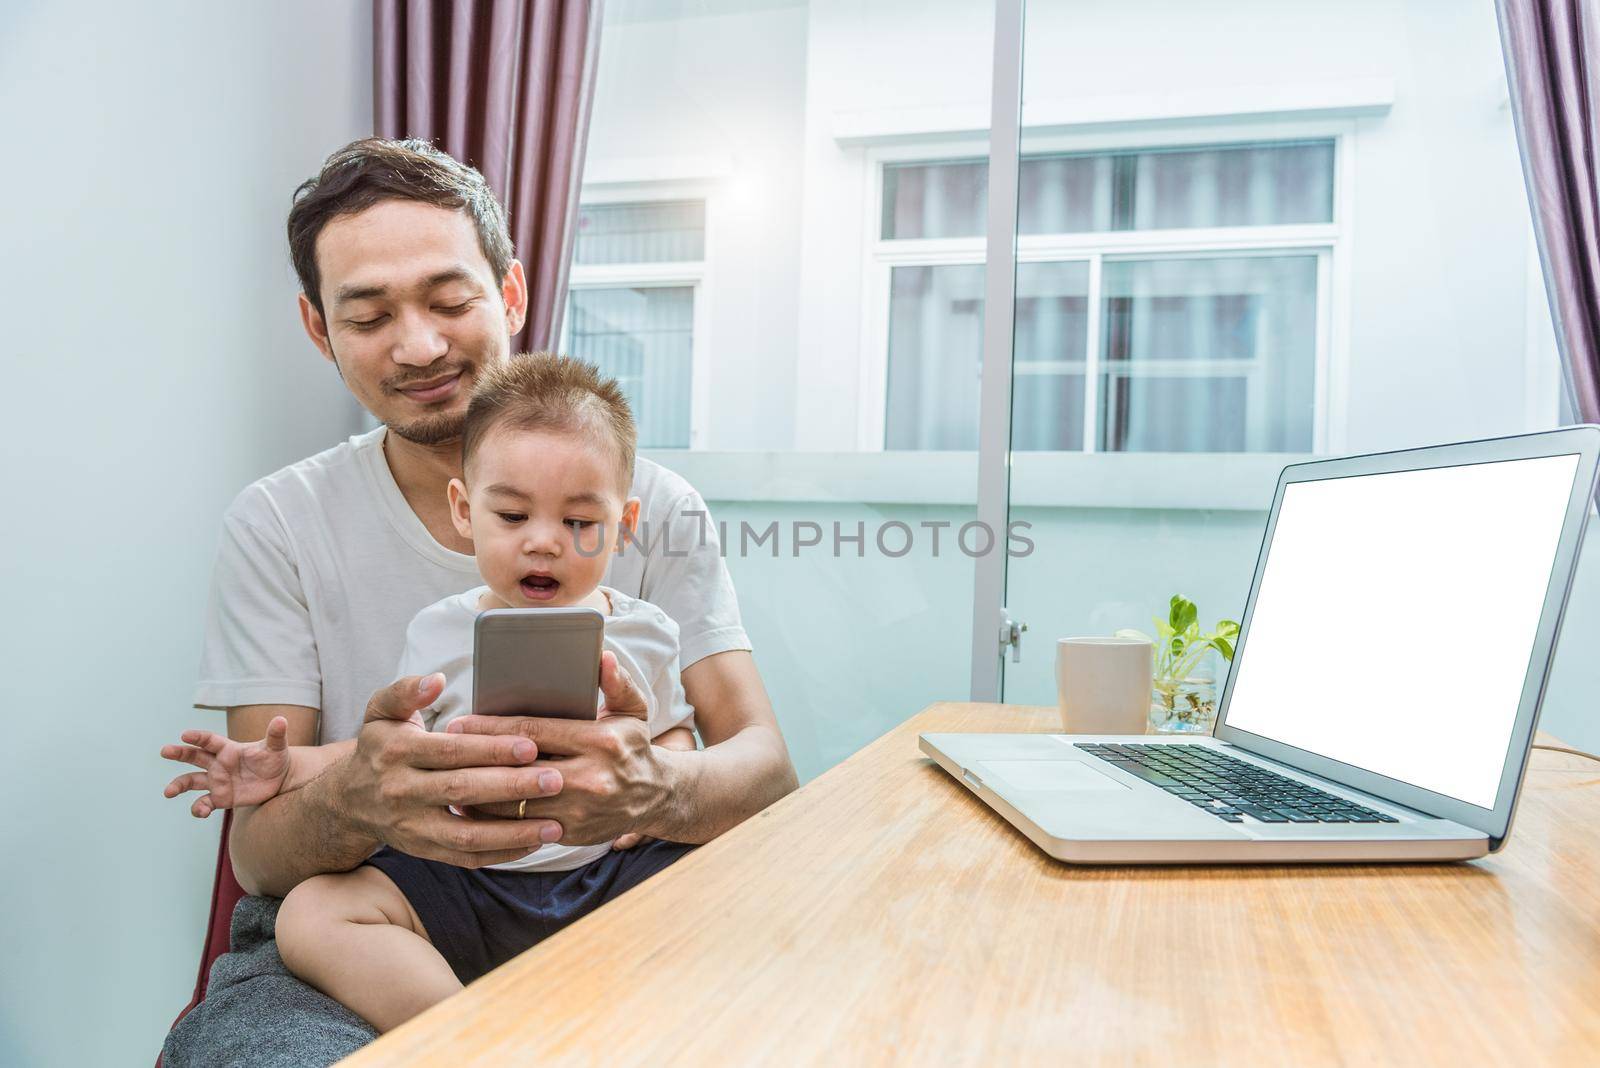 Asian father and son using smart phone together in home background. Technology and People concept. Lifestyles and Happy family theme. Internet and communication theme by MiniStocker